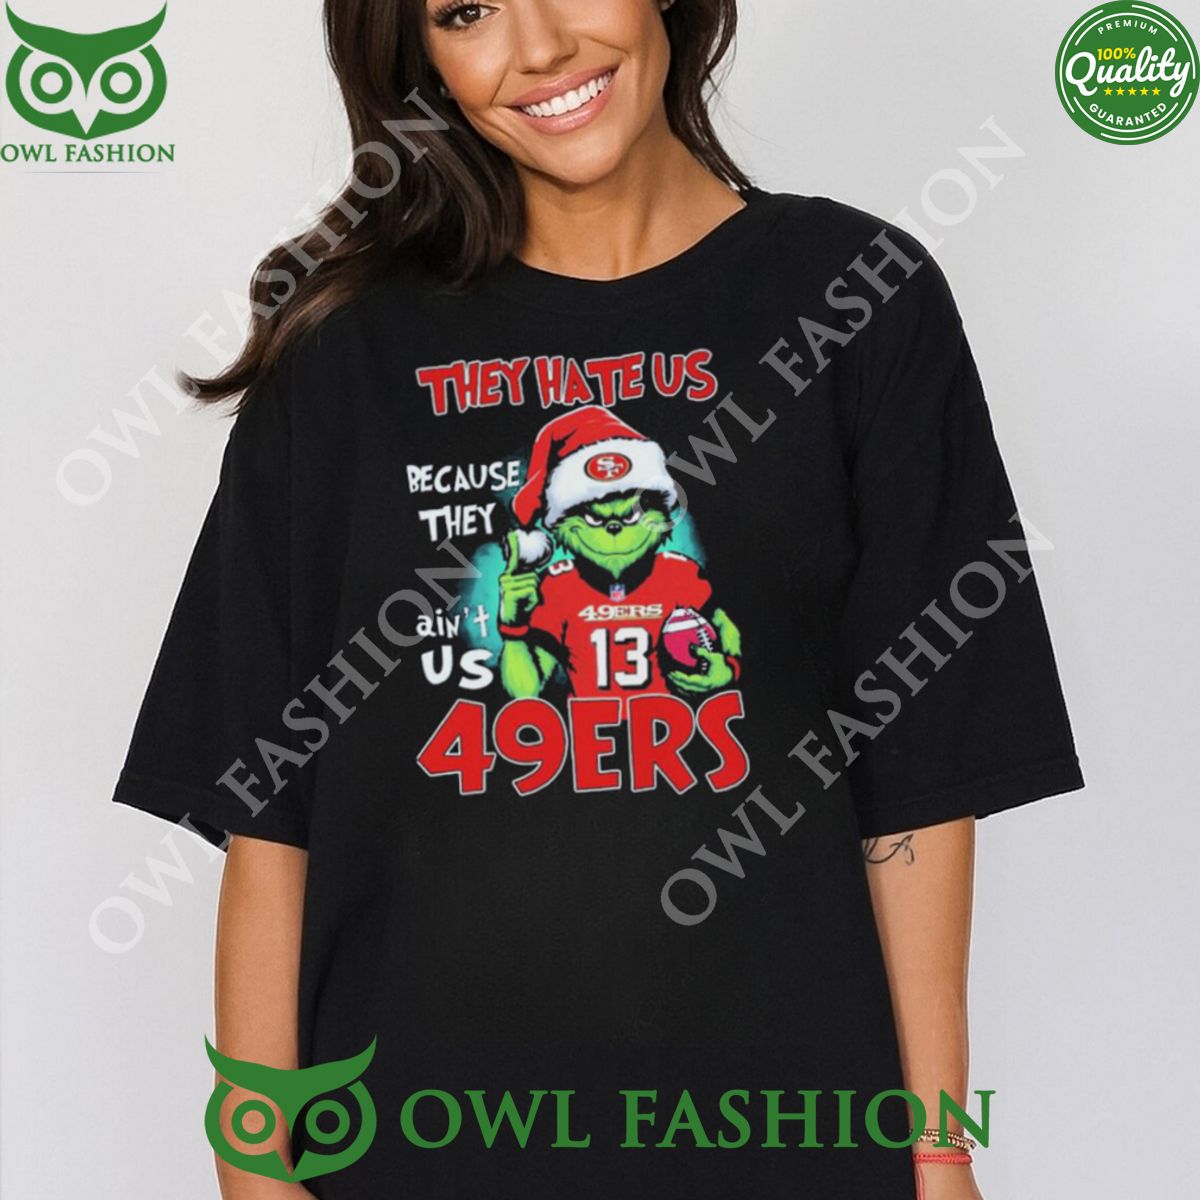 they hate us because aint us san francisco 49ers the grinch christmas t shirt 1 reTtB.jpg